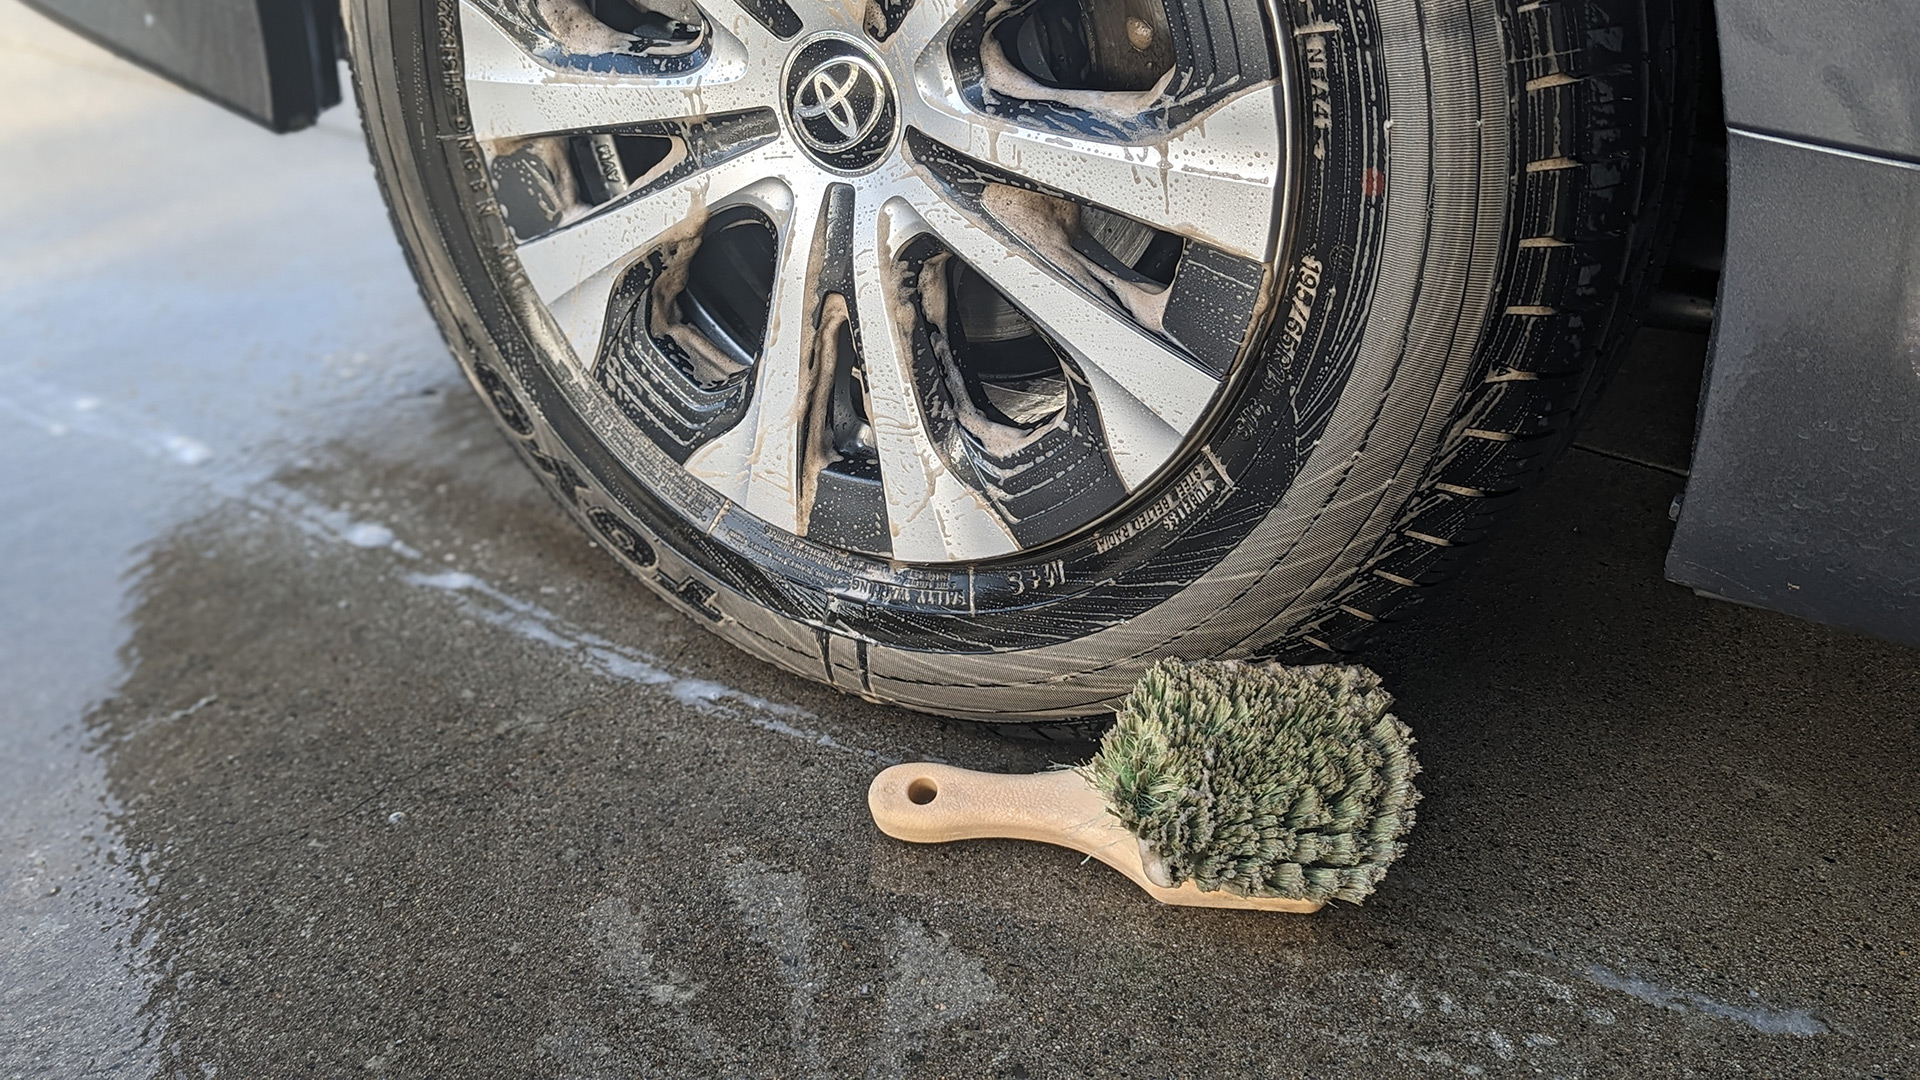 Mothers Tire Wheel And Well Brush Kit